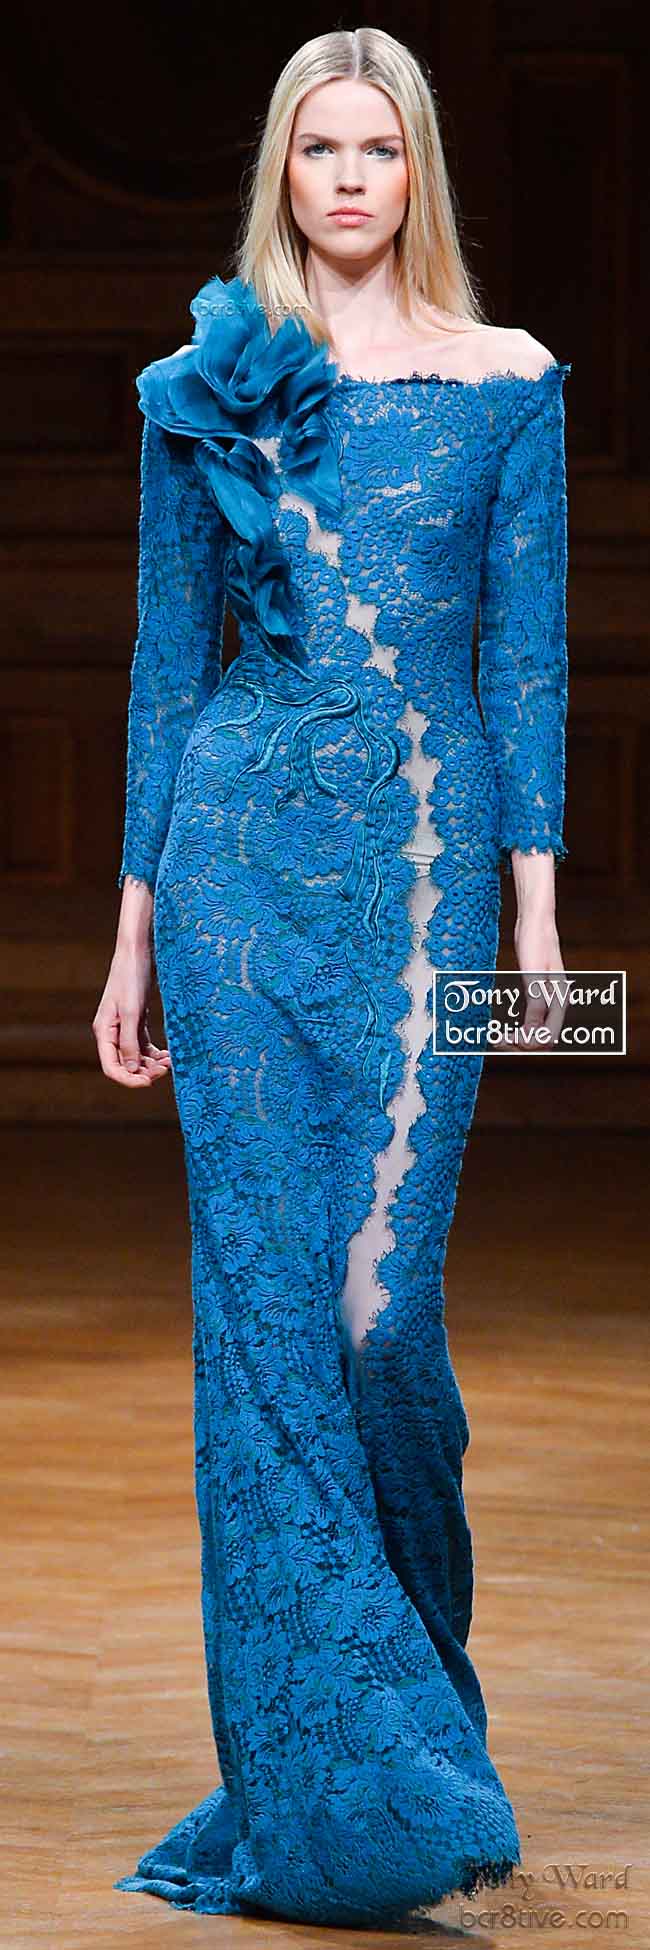 Sea Blue Lace Silhouette Focused Gown